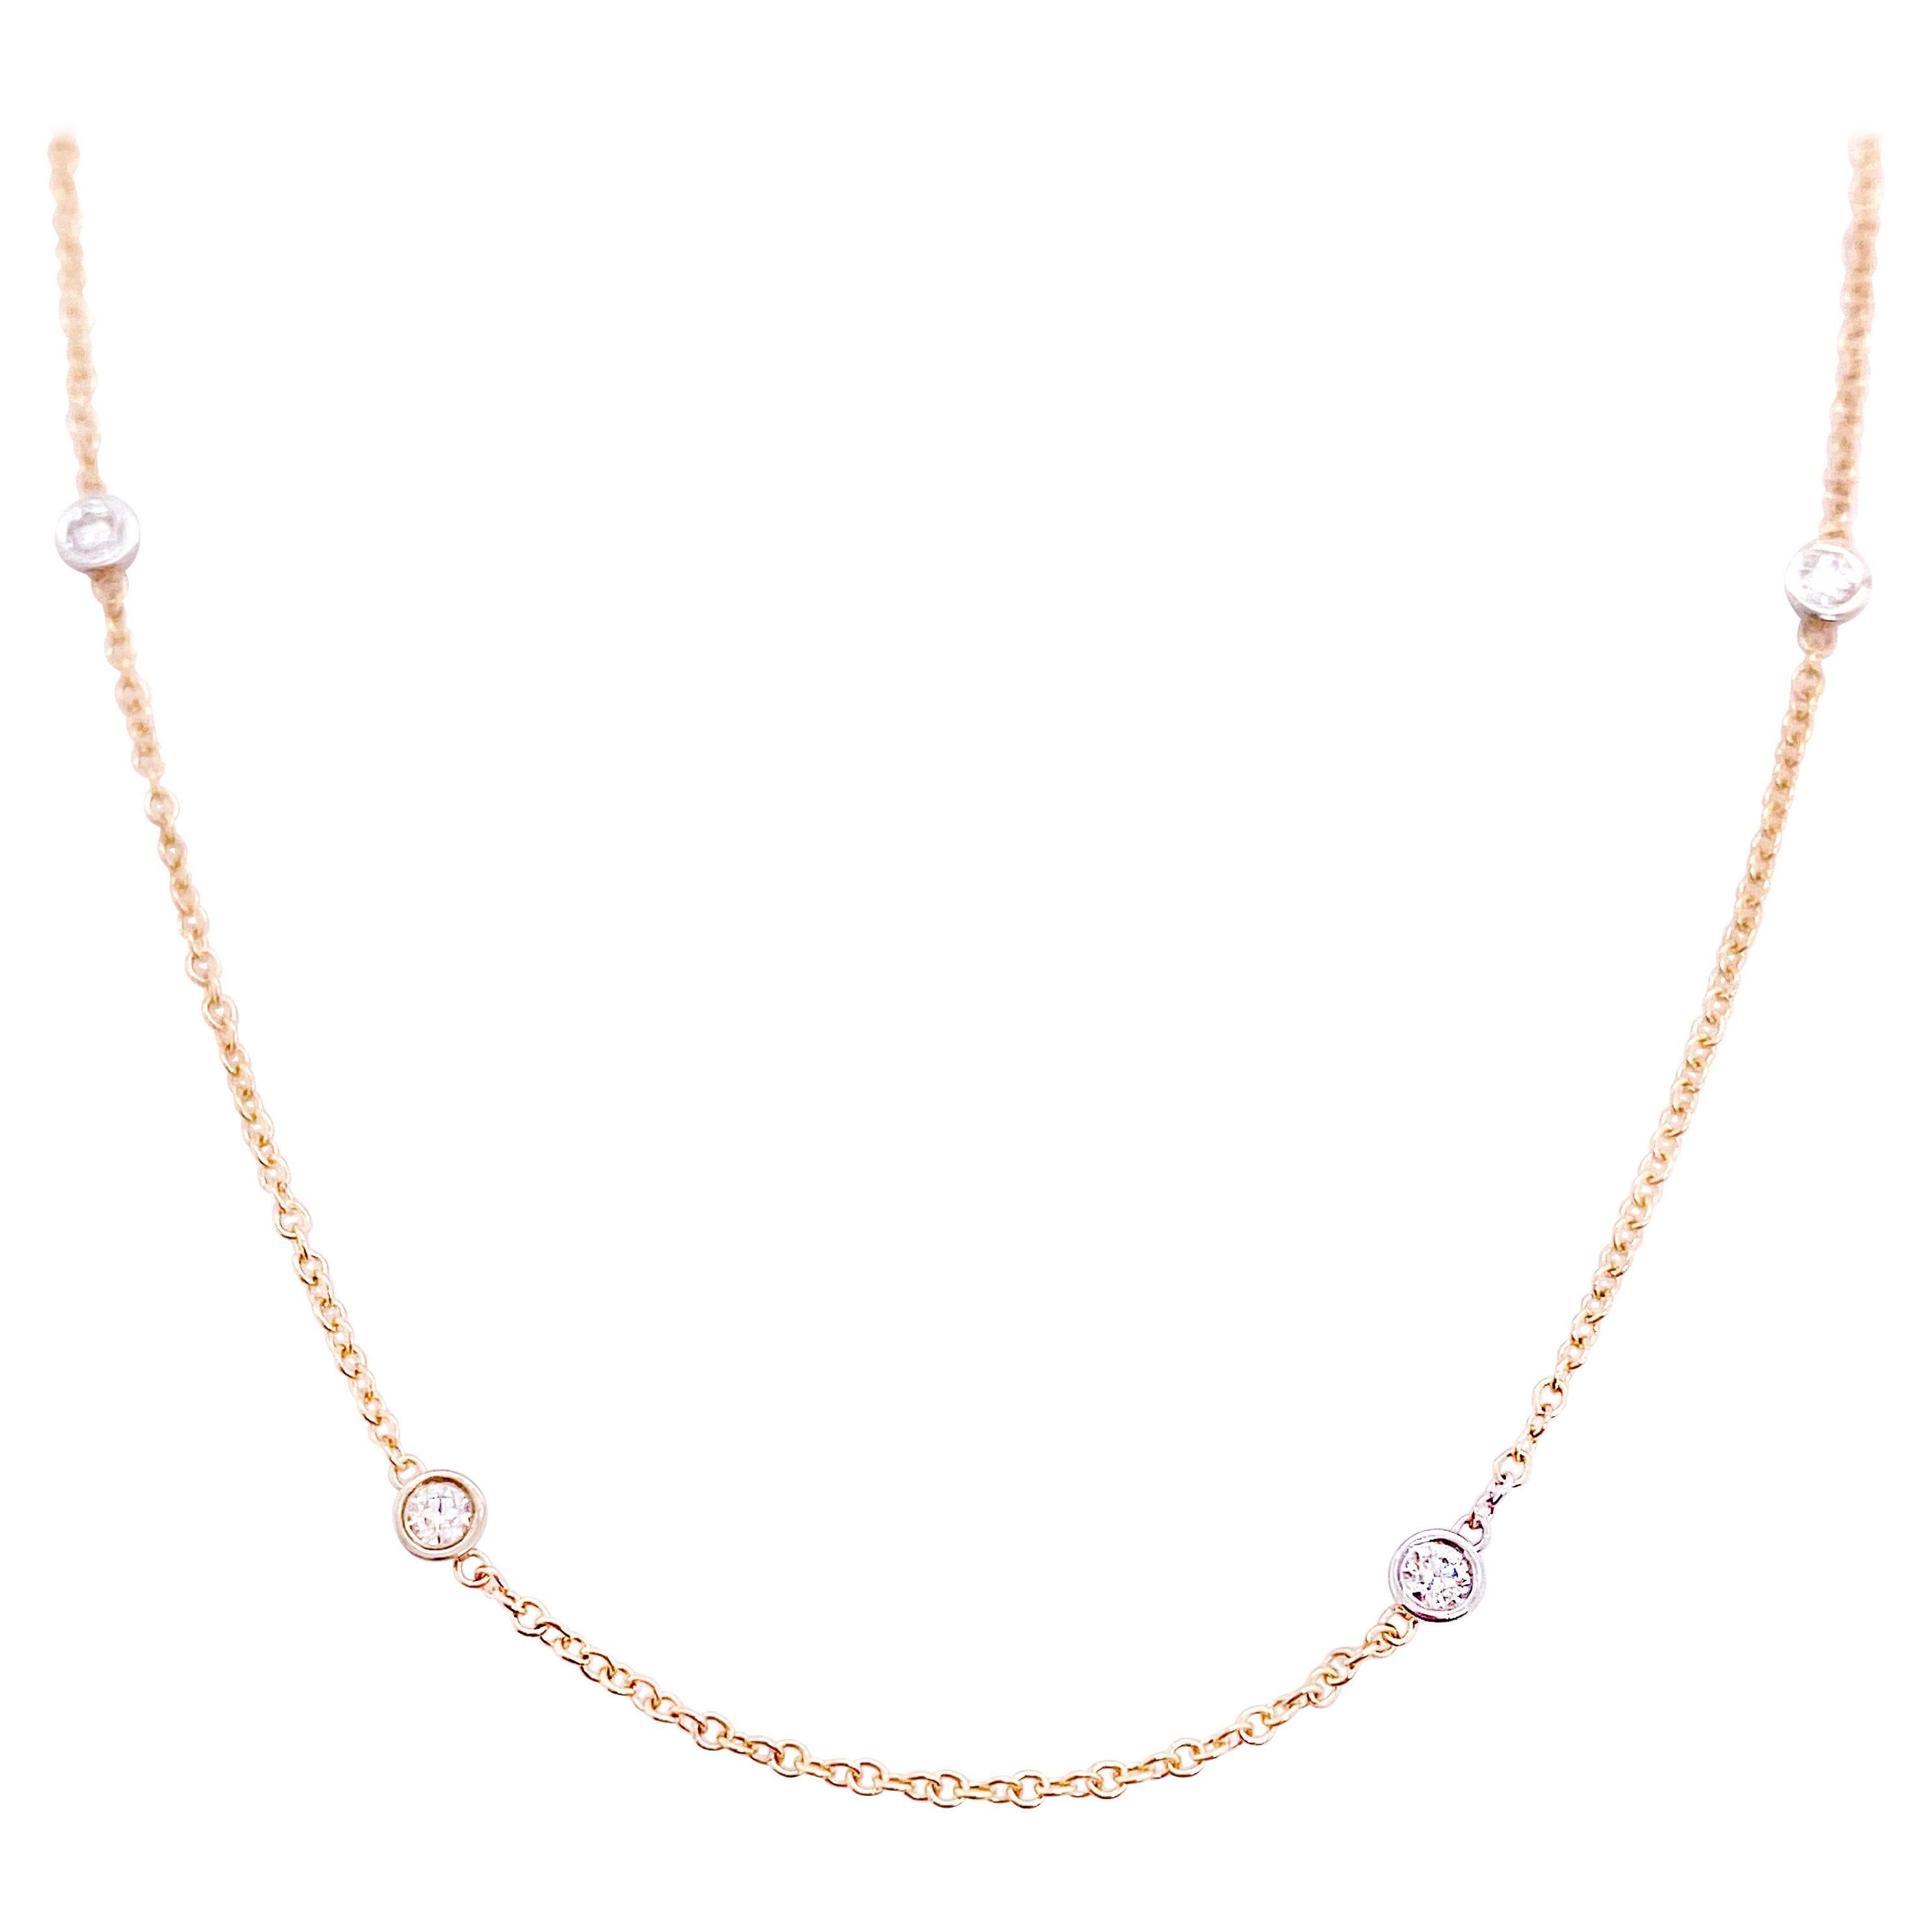 Diamond by Yard, Necklace, 8 Round Bezel Diamonds in Mixed Metal Yellow Gold